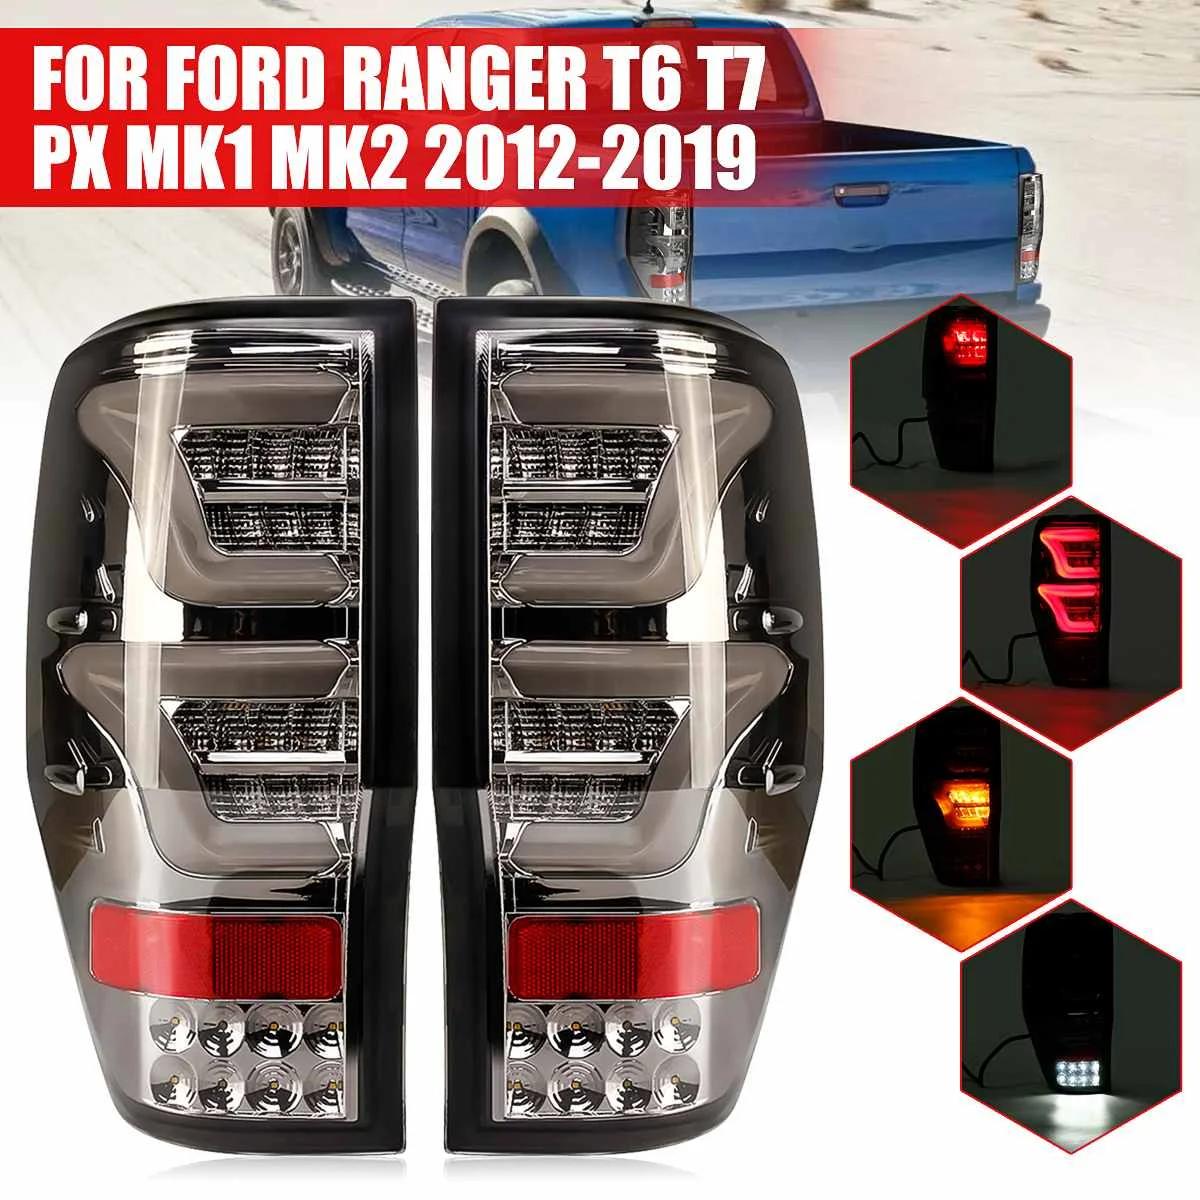 

Pair Tail Light For Ford Ranger T6 T7 PX MK1 MK2 Wildtrak 2012-2019 Car Tail Light with Bulbs Wiring Smoked Cover